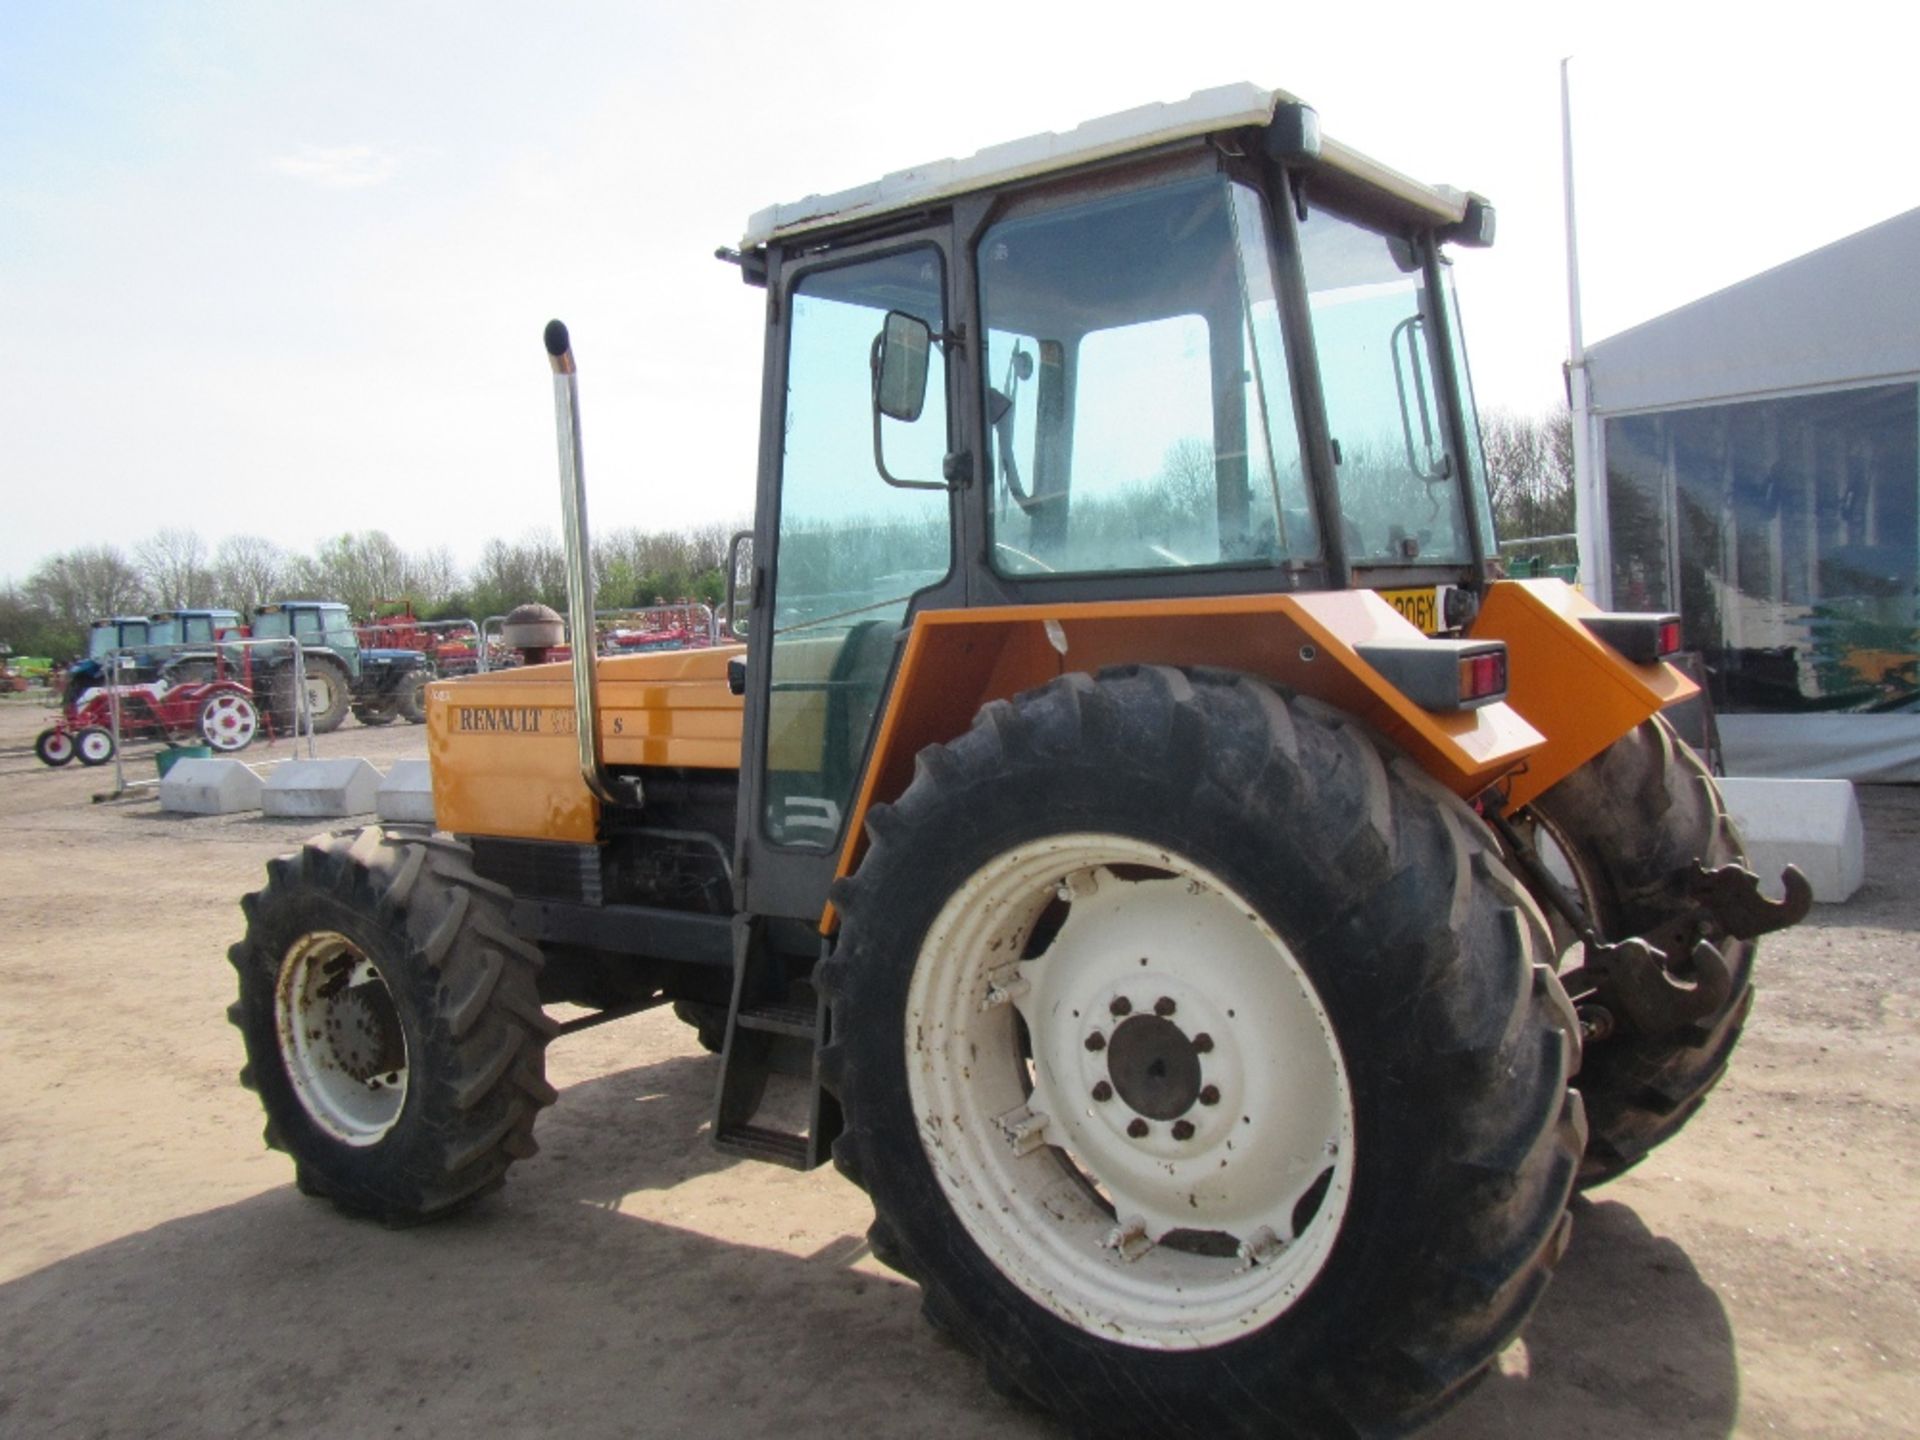 1983 Renault 981-4 Tractor. Reg Docs will be supplied. Reg. No. MBX 206Y Chassis No. 4483791 - Image 9 of 16